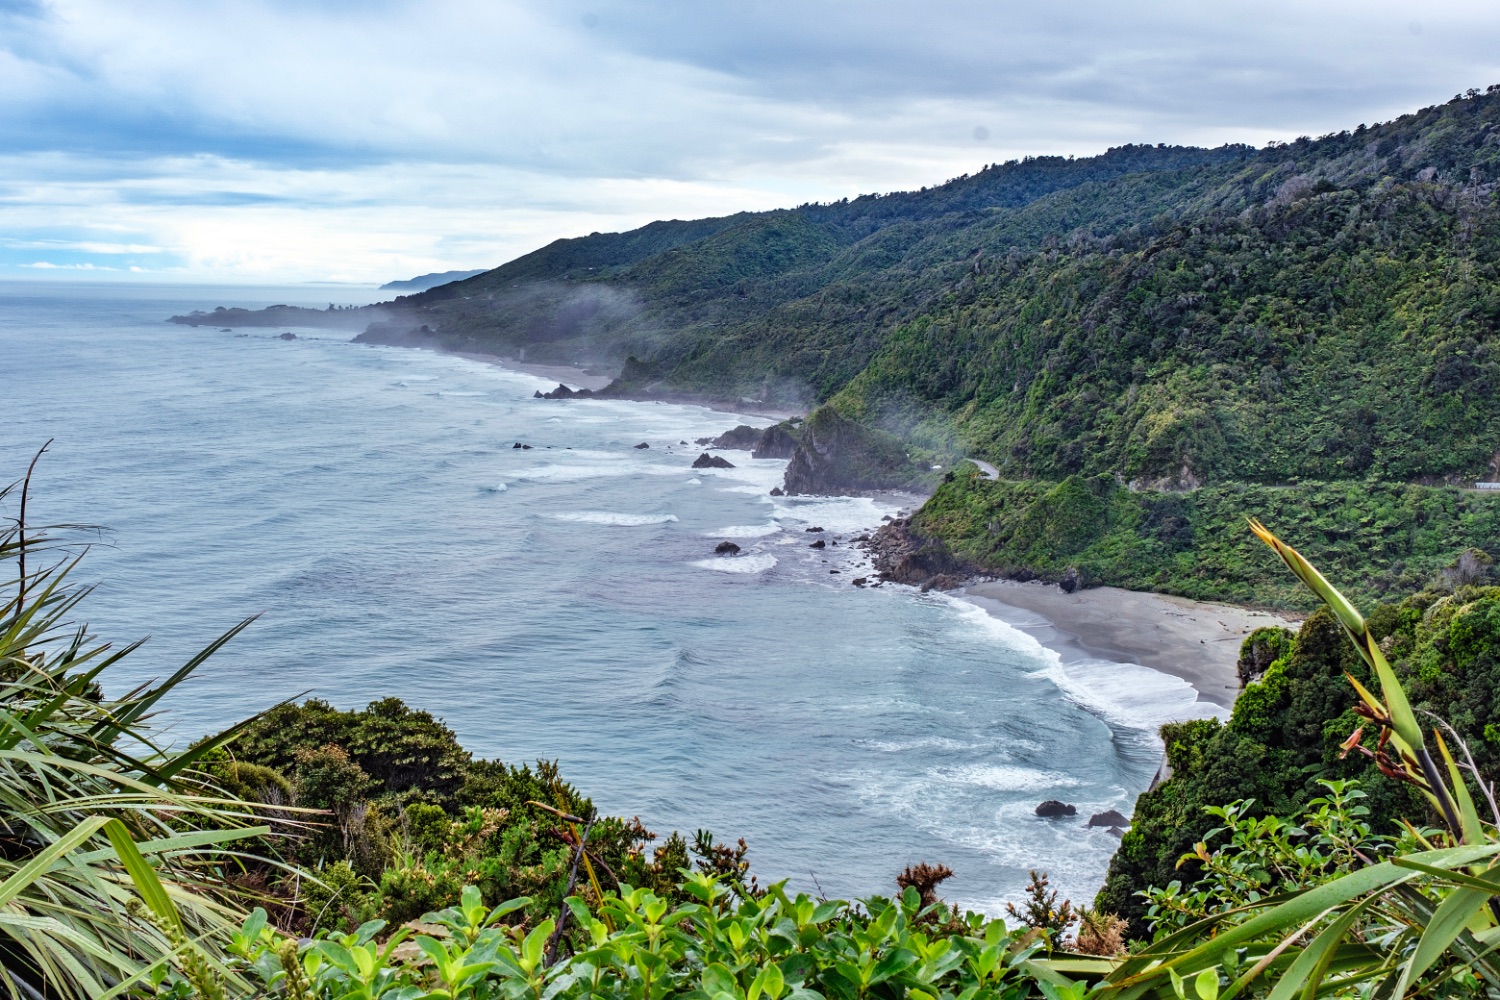 Between Punakaiki and Cape Foulwind